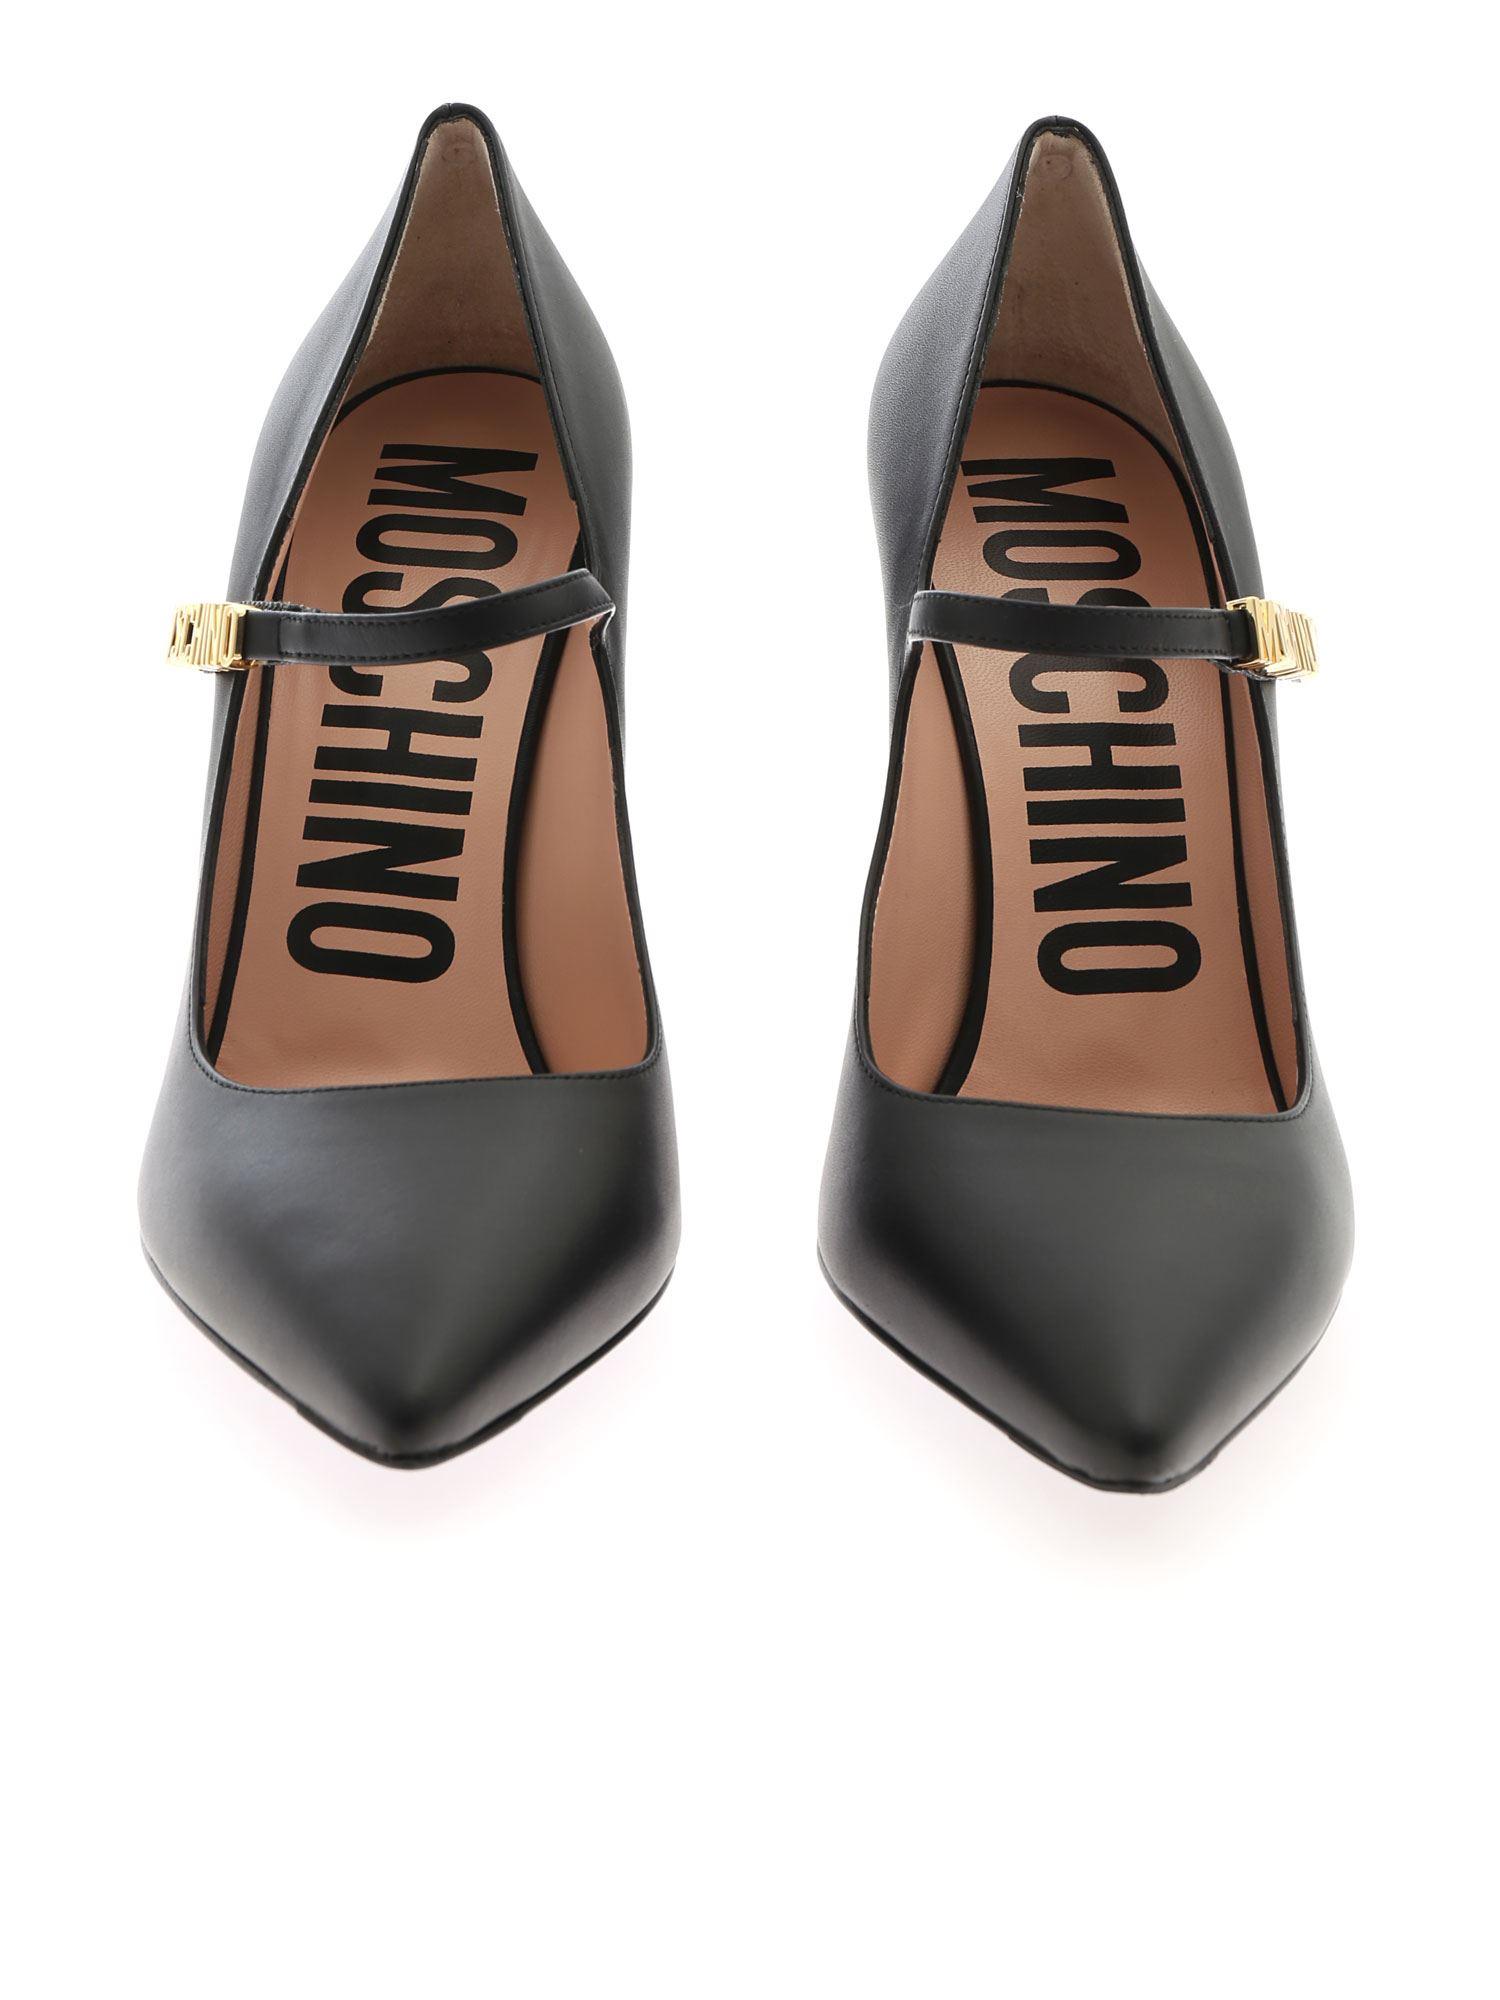 Moschino Gold Logo Leather Pumps In Black - Save 7% - Lyst